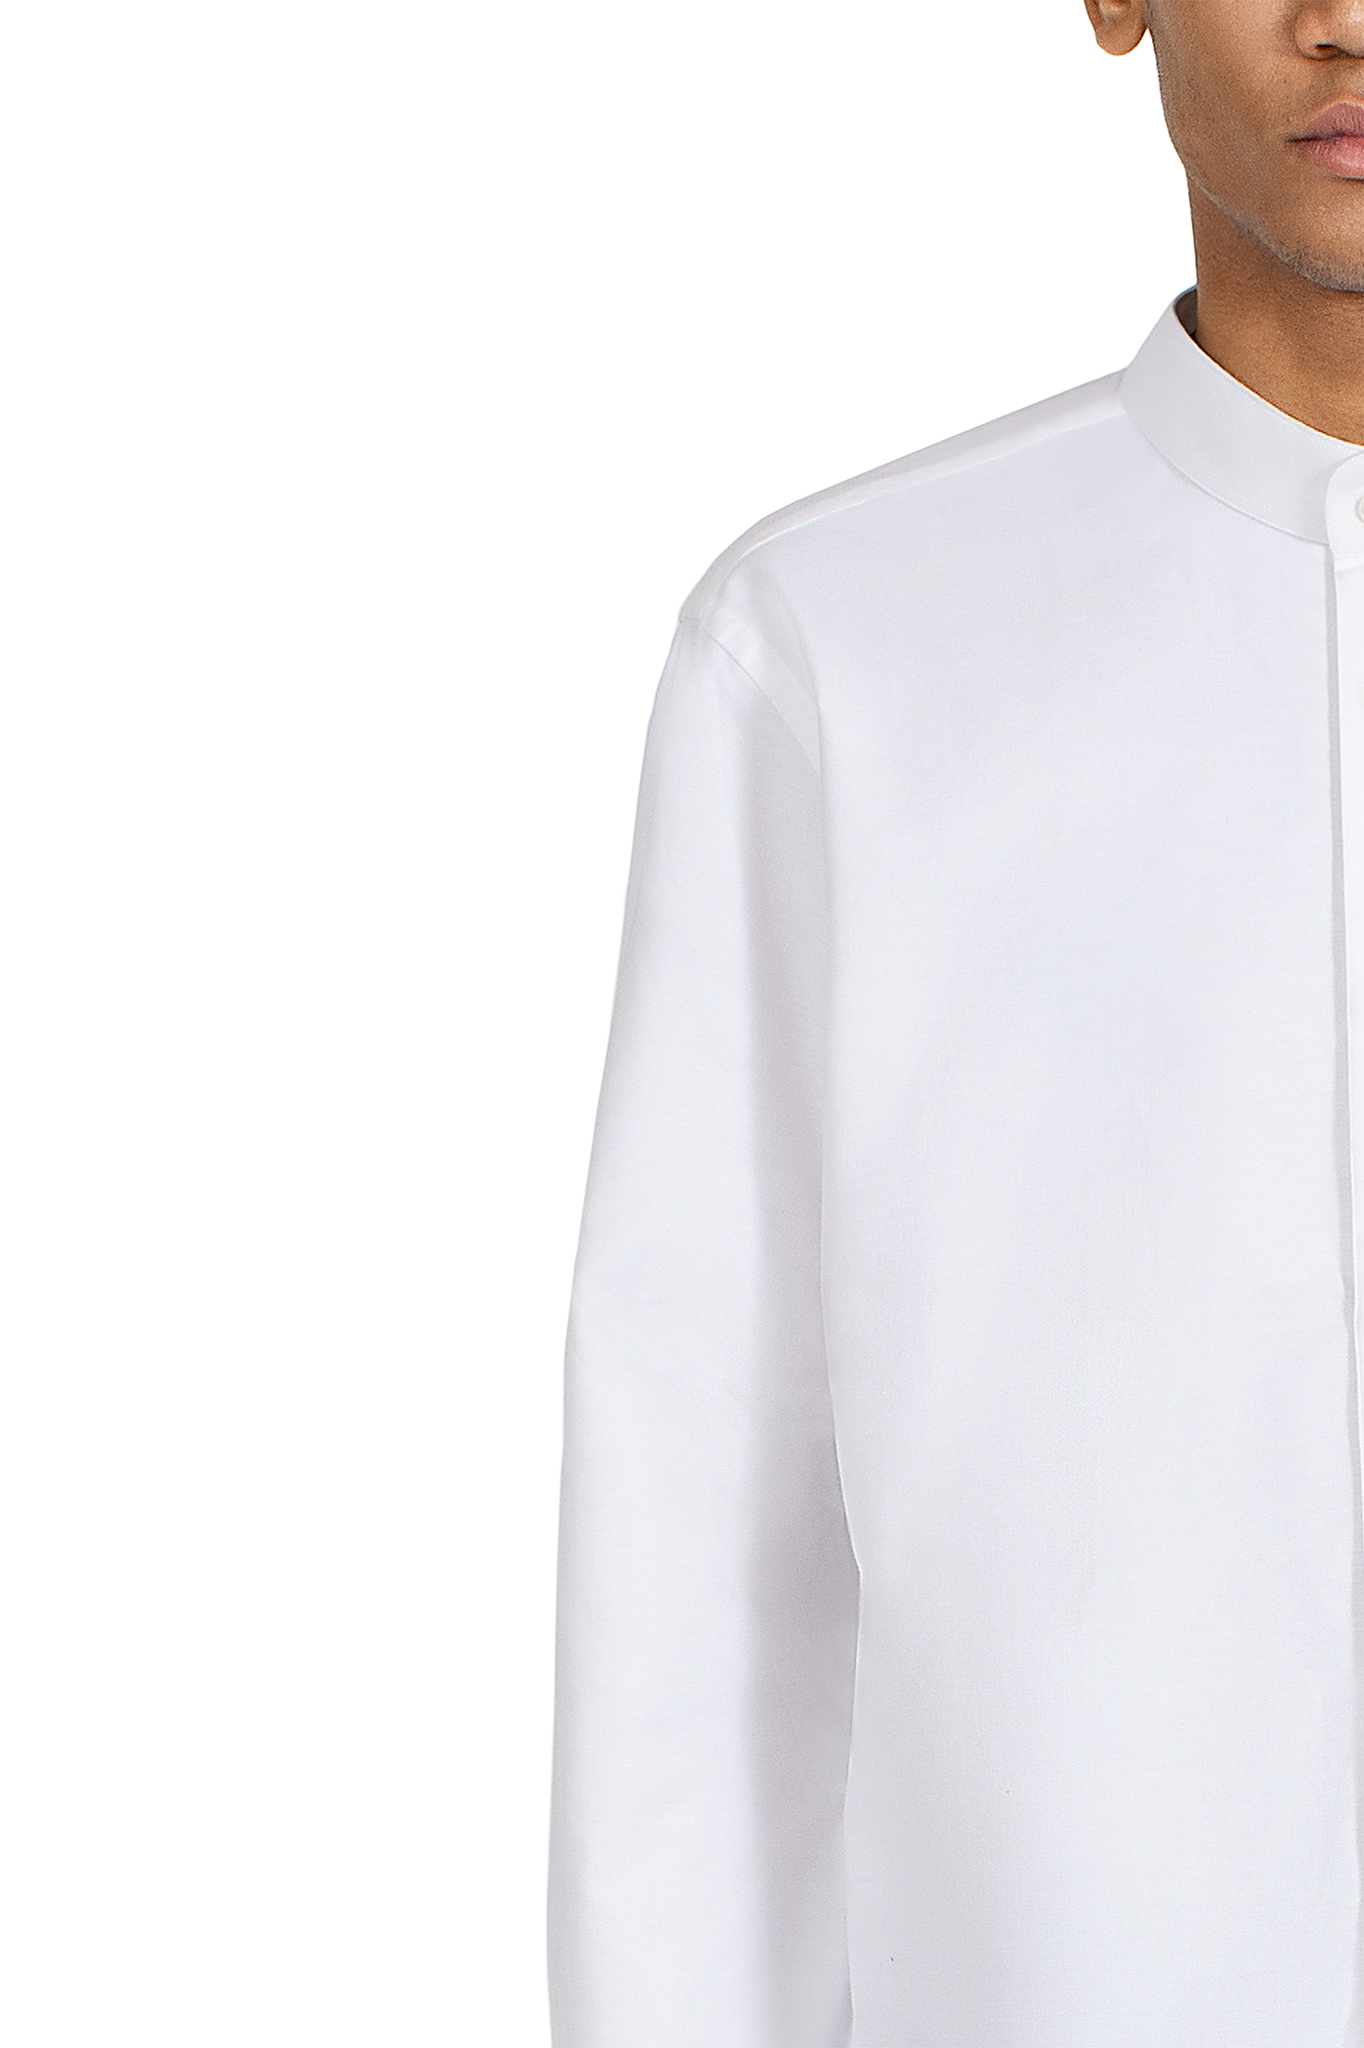 Long Sleeved Oxford Shirt in White